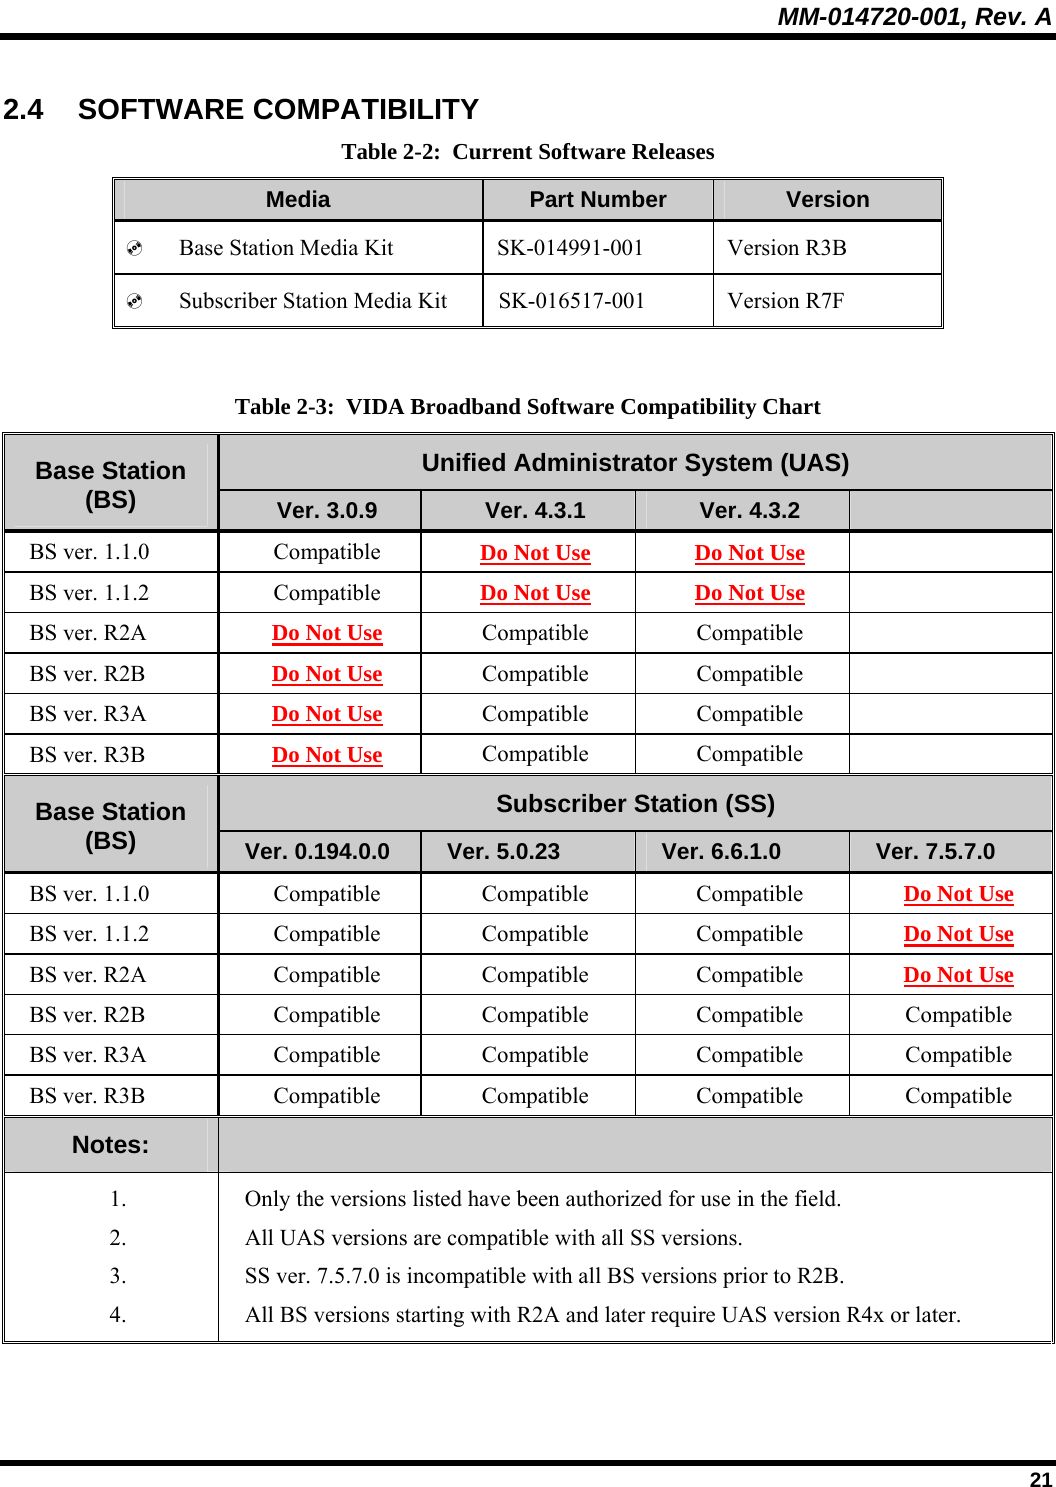 MM-014720-001, Rev. A  21 2.4 SOFTWARE COMPATIBILITY Table 2-2:  Current Software Releases Media   Part Number  Version    Base Station Media Kit  SK-014991-001  Version R3B    Subscriber Station Media Kit  SK-016517-001  Version R7F  Table 2-3:  VIDA Broadband Software Compatibility Chart Unified Administrator System (UAS) Base Station (BS)  Ver. 3.0.9  Ver. 4.3.1  Ver. 4.3.2   BS ver. 1.1.0  Compatible  Do Not Use  Do Not Use  BS ver. 1.1.2  Compatible  Do Not Use Do Not Use  BS ver. R2A  Do Not Use Compatible Compatible  BS ver. R2B  Do Not Use Compatible Compatible  BS ver. R3A  Do Not Use Compatible Compatible  BS ver. R3B  Do Not Use Compatible Compatible  Subscriber Station (SS) Base Station (BS)  Ver. 0.194.0.0  Ver. 5.0.23  Ver. 6.6.1.0  Ver. 7.5.7.0 BS ver. 1.1.0  Compatible  Compatible  Compatible  Do Not Use BS ver. 1.1.2  Compatible  Compatible  Compatible  Do Not Use BS ver. R2A  Compatible  Compatible  Compatible  Do Not Use BS ver. R2B  Compatible  Compatible  Compatible  Compatible BS ver. R3A  Compatible  Compatible  Compatible  Compatible BS ver. R3B  Compatible  Compatible  Compatible  Compatible Notes:   1.  Only the versions listed have been authorized for use in the field. 2.  All UAS versions are compatible with all SS versions. 3.  SS ver. 7.5.7.0 is incompatible with all BS versions prior to R2B. 4.  All BS versions starting with R2A and later require UAS version R4x or later.  